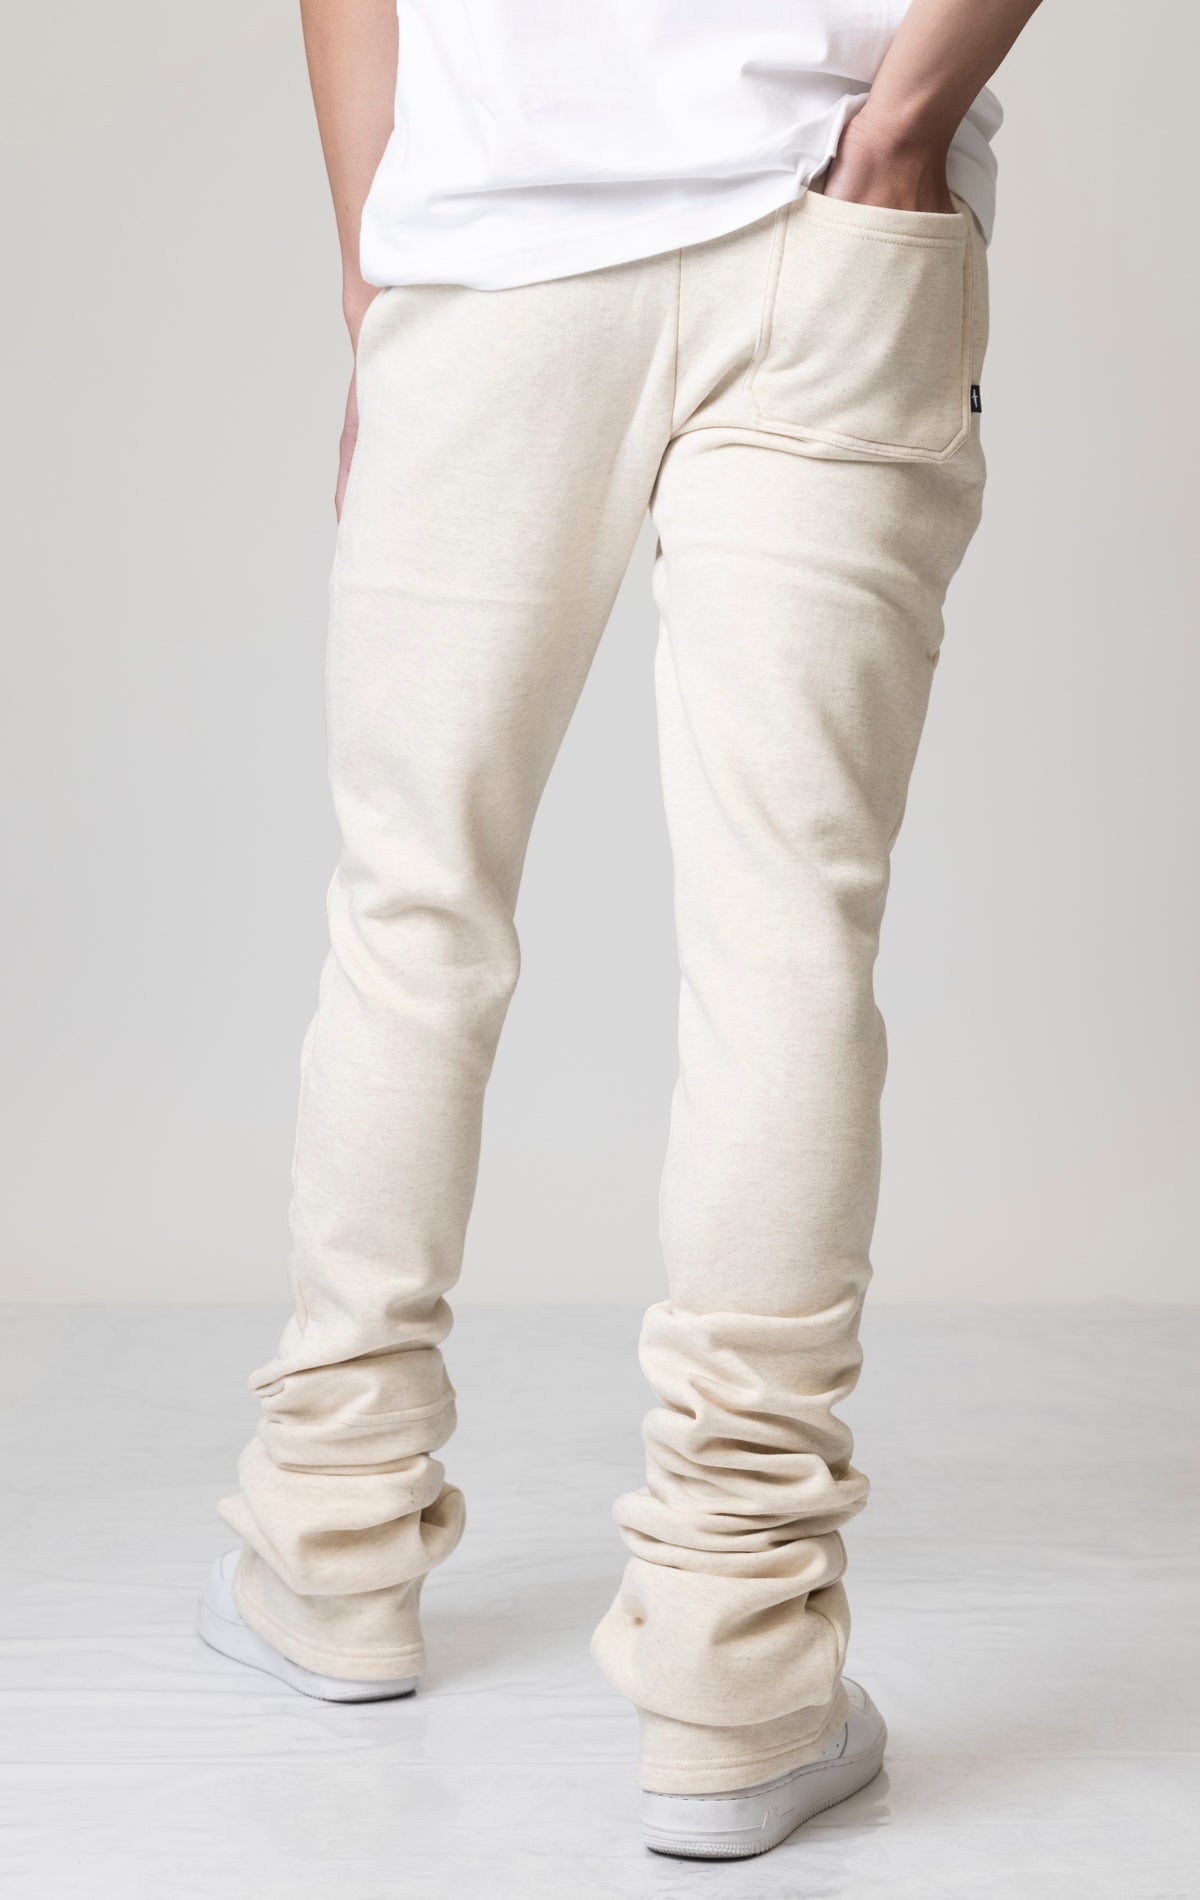 Oatmeal Core Dagger Super Stacked Joggers feature a unique, stacked leg design for a stylish look. Subtle embroidered branding adds a touch of detail. The joggers are made from a comfortable blend of 80% cotton and 20% polyester for all-day wear. An elastic waistband and pockets offer both convenience and functionality.